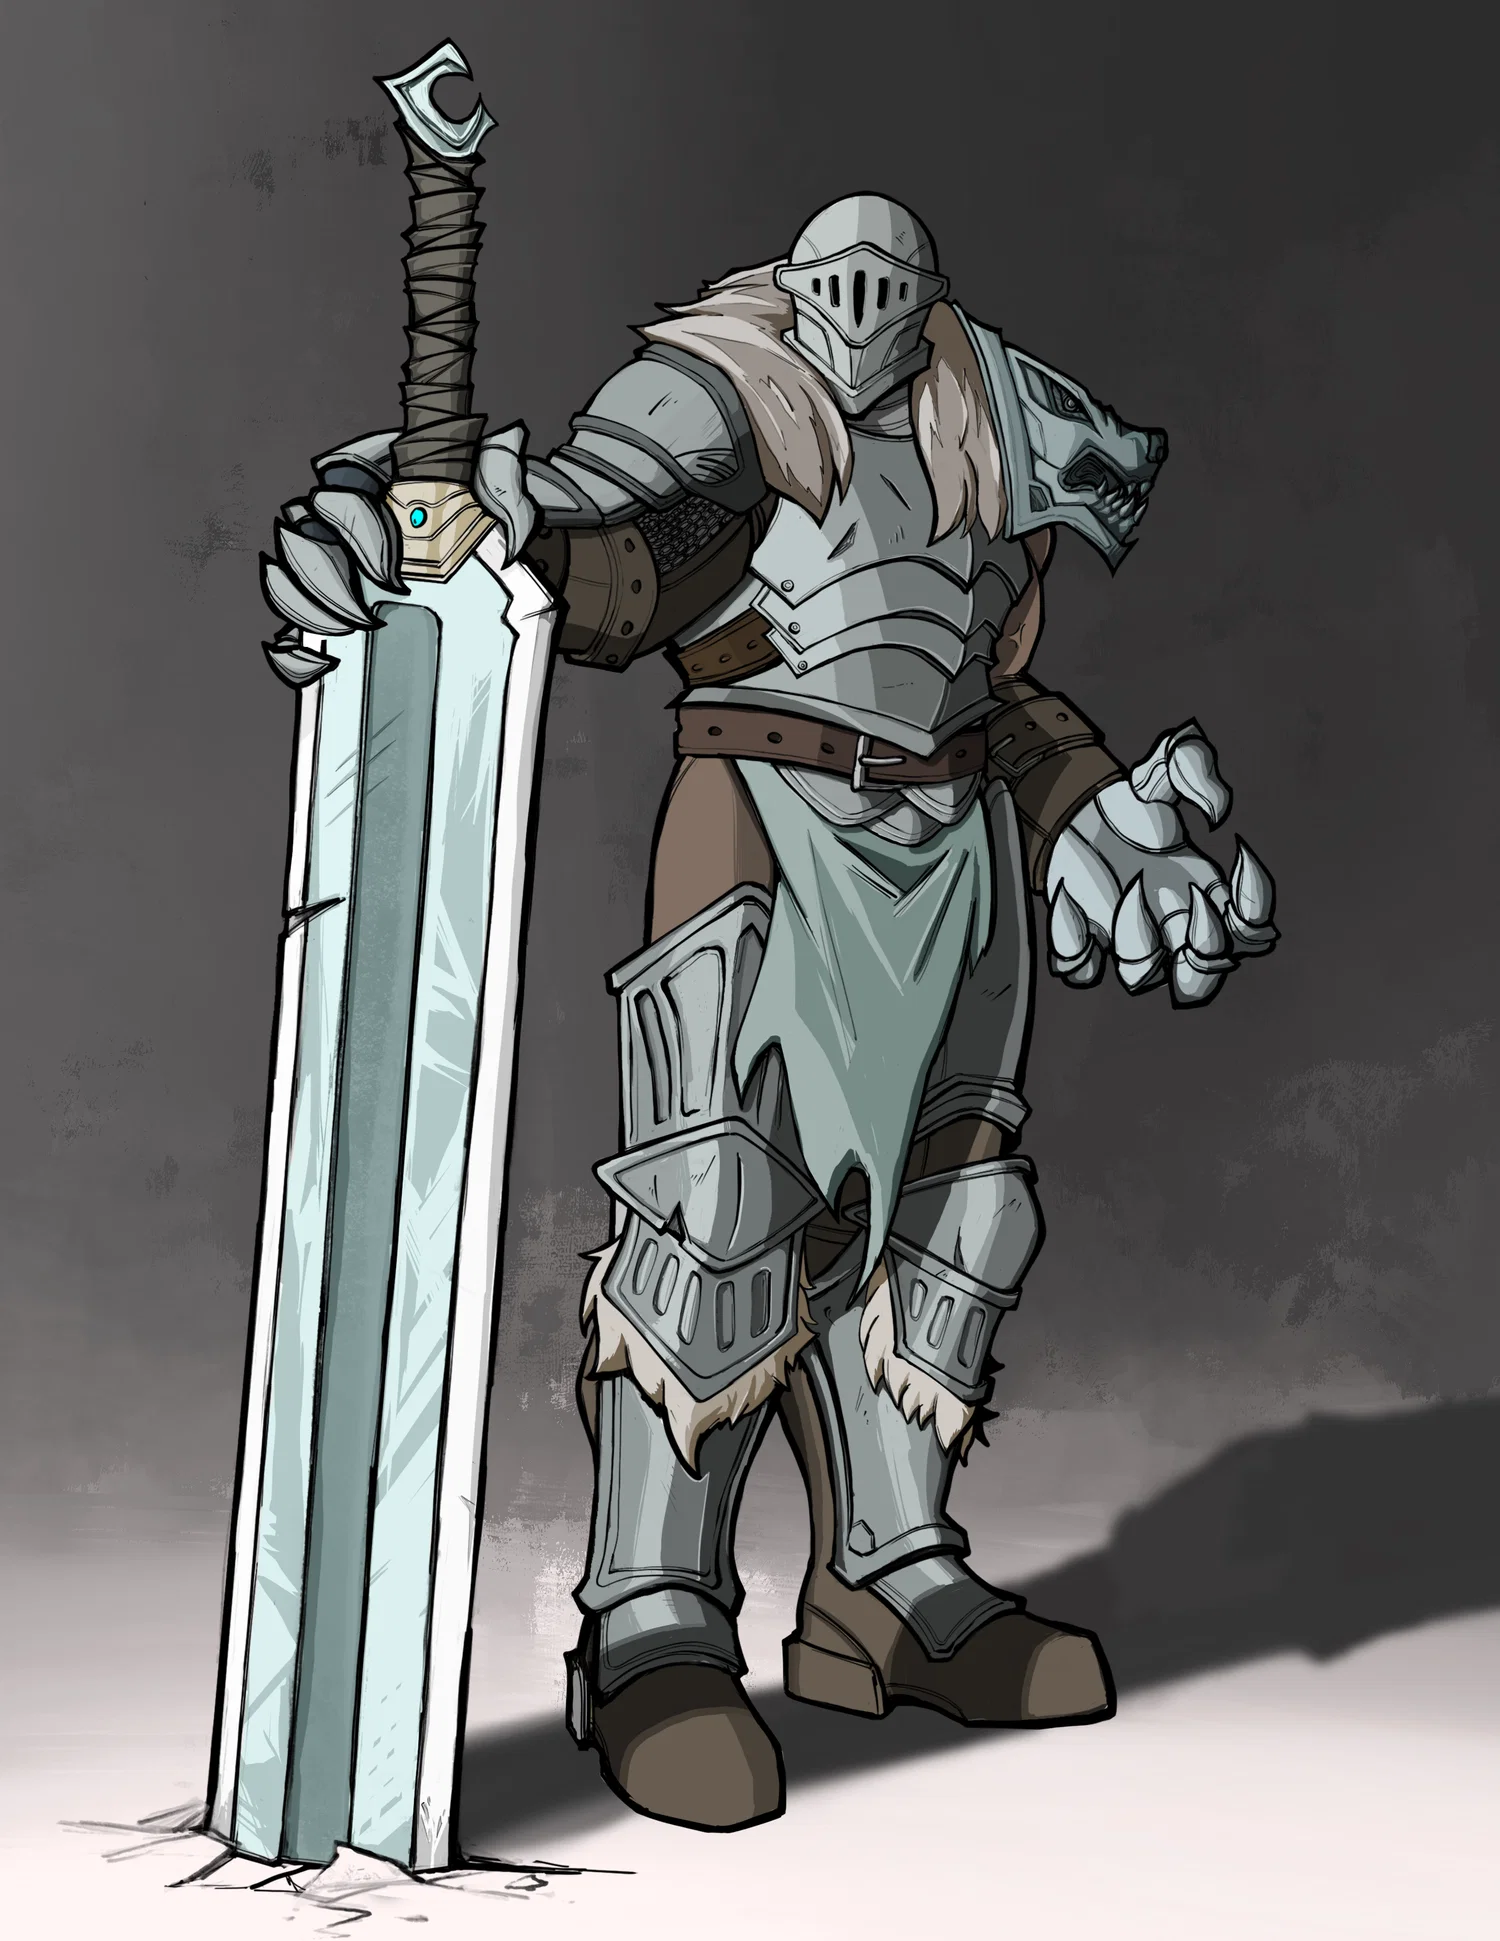 Wolfram, Ascendant Lord of the North, is a giant man with an even bigger sword. Hailing from the frigid Northern Realm, he believes that strength is a necessity, not a requirement, to defend the helpless from evils that roam the world. 